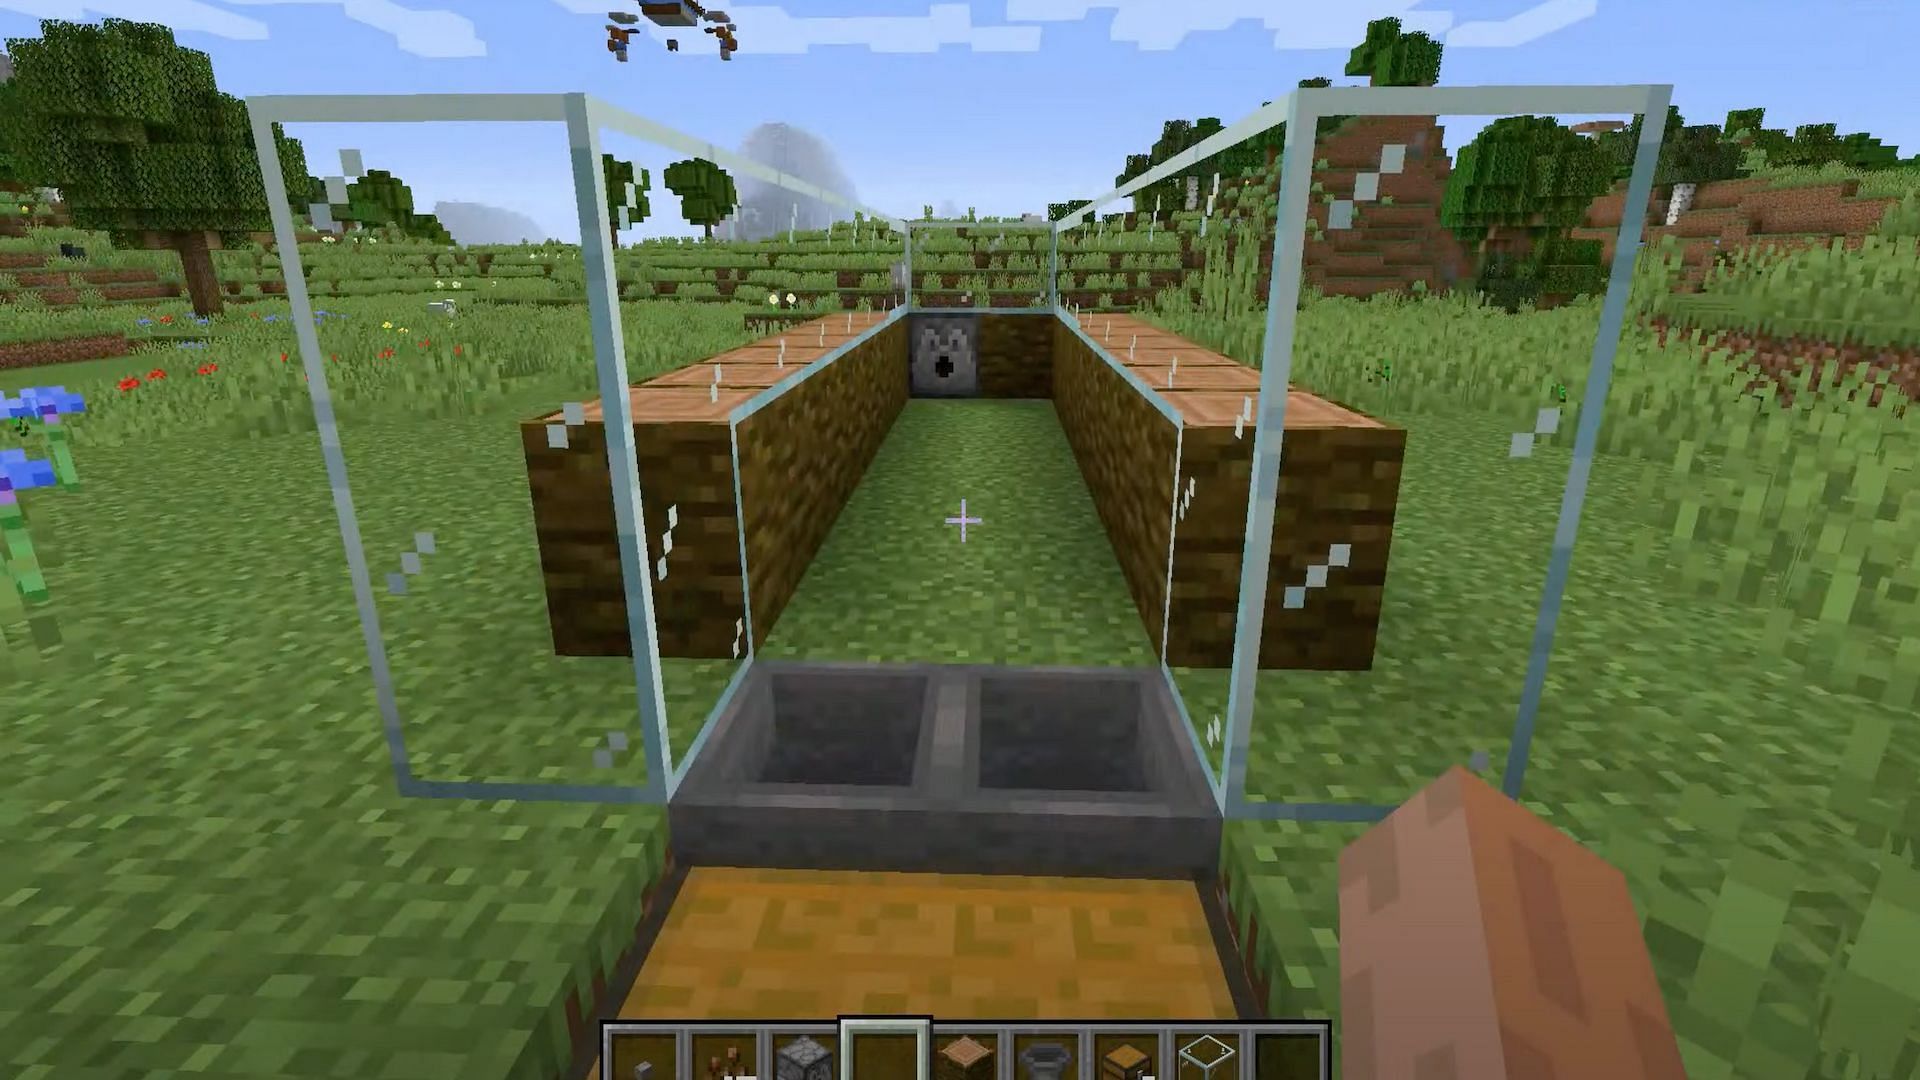 Players can replace the first logs with glass blocks for a nicer look (Image via NaMiature/YouTube)